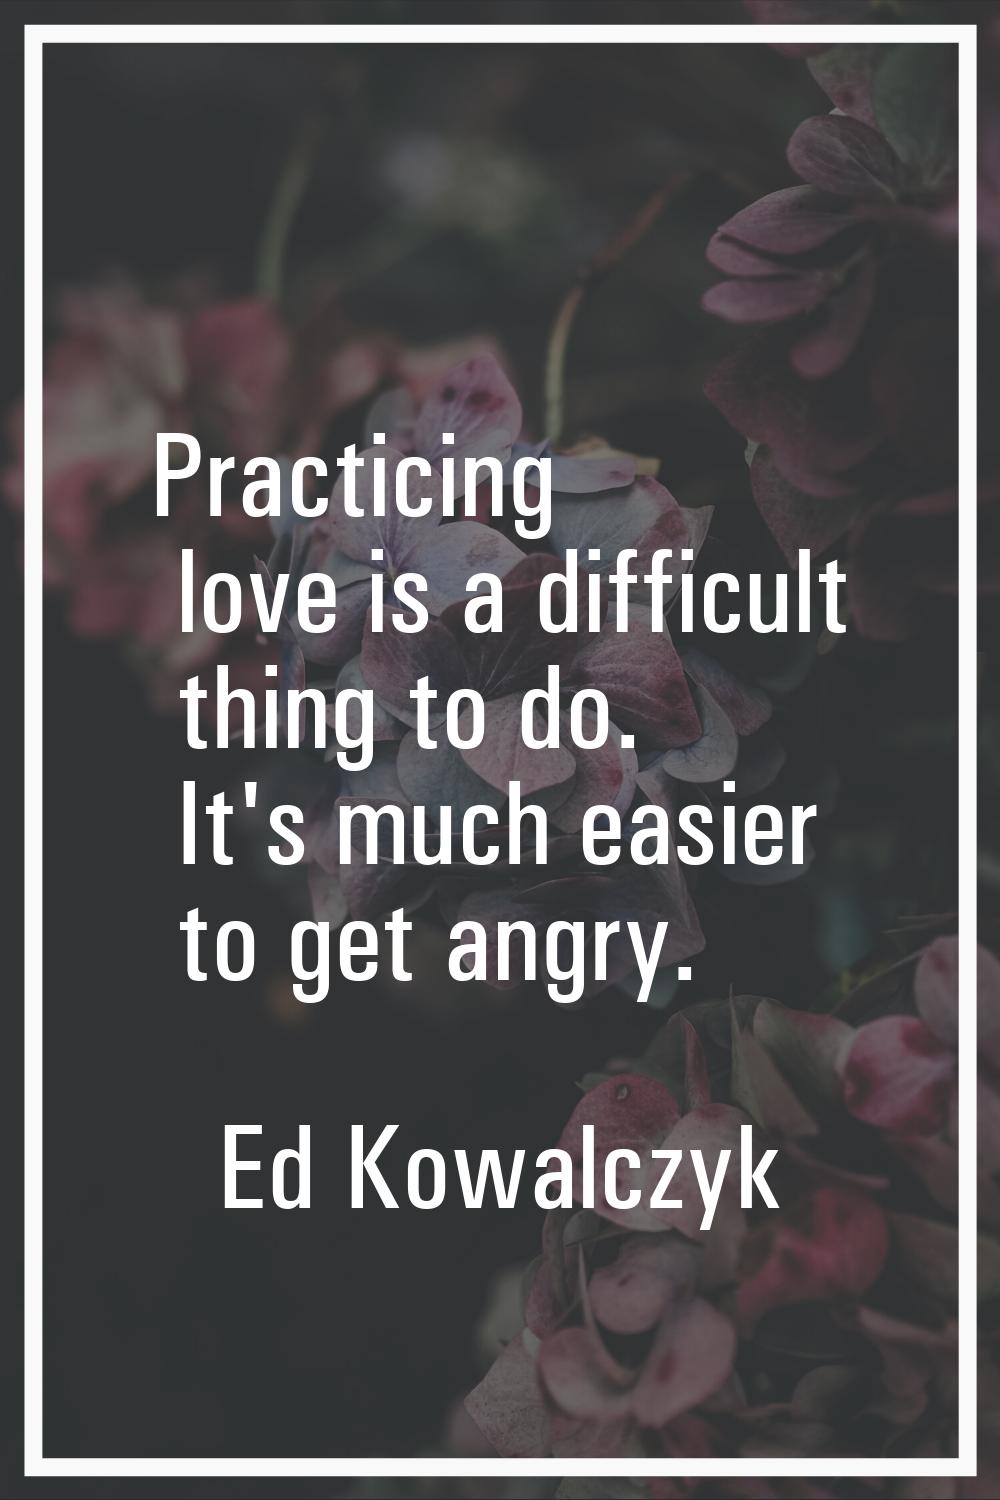 Practicing love is a difficult thing to do. It's much easier to get angry.